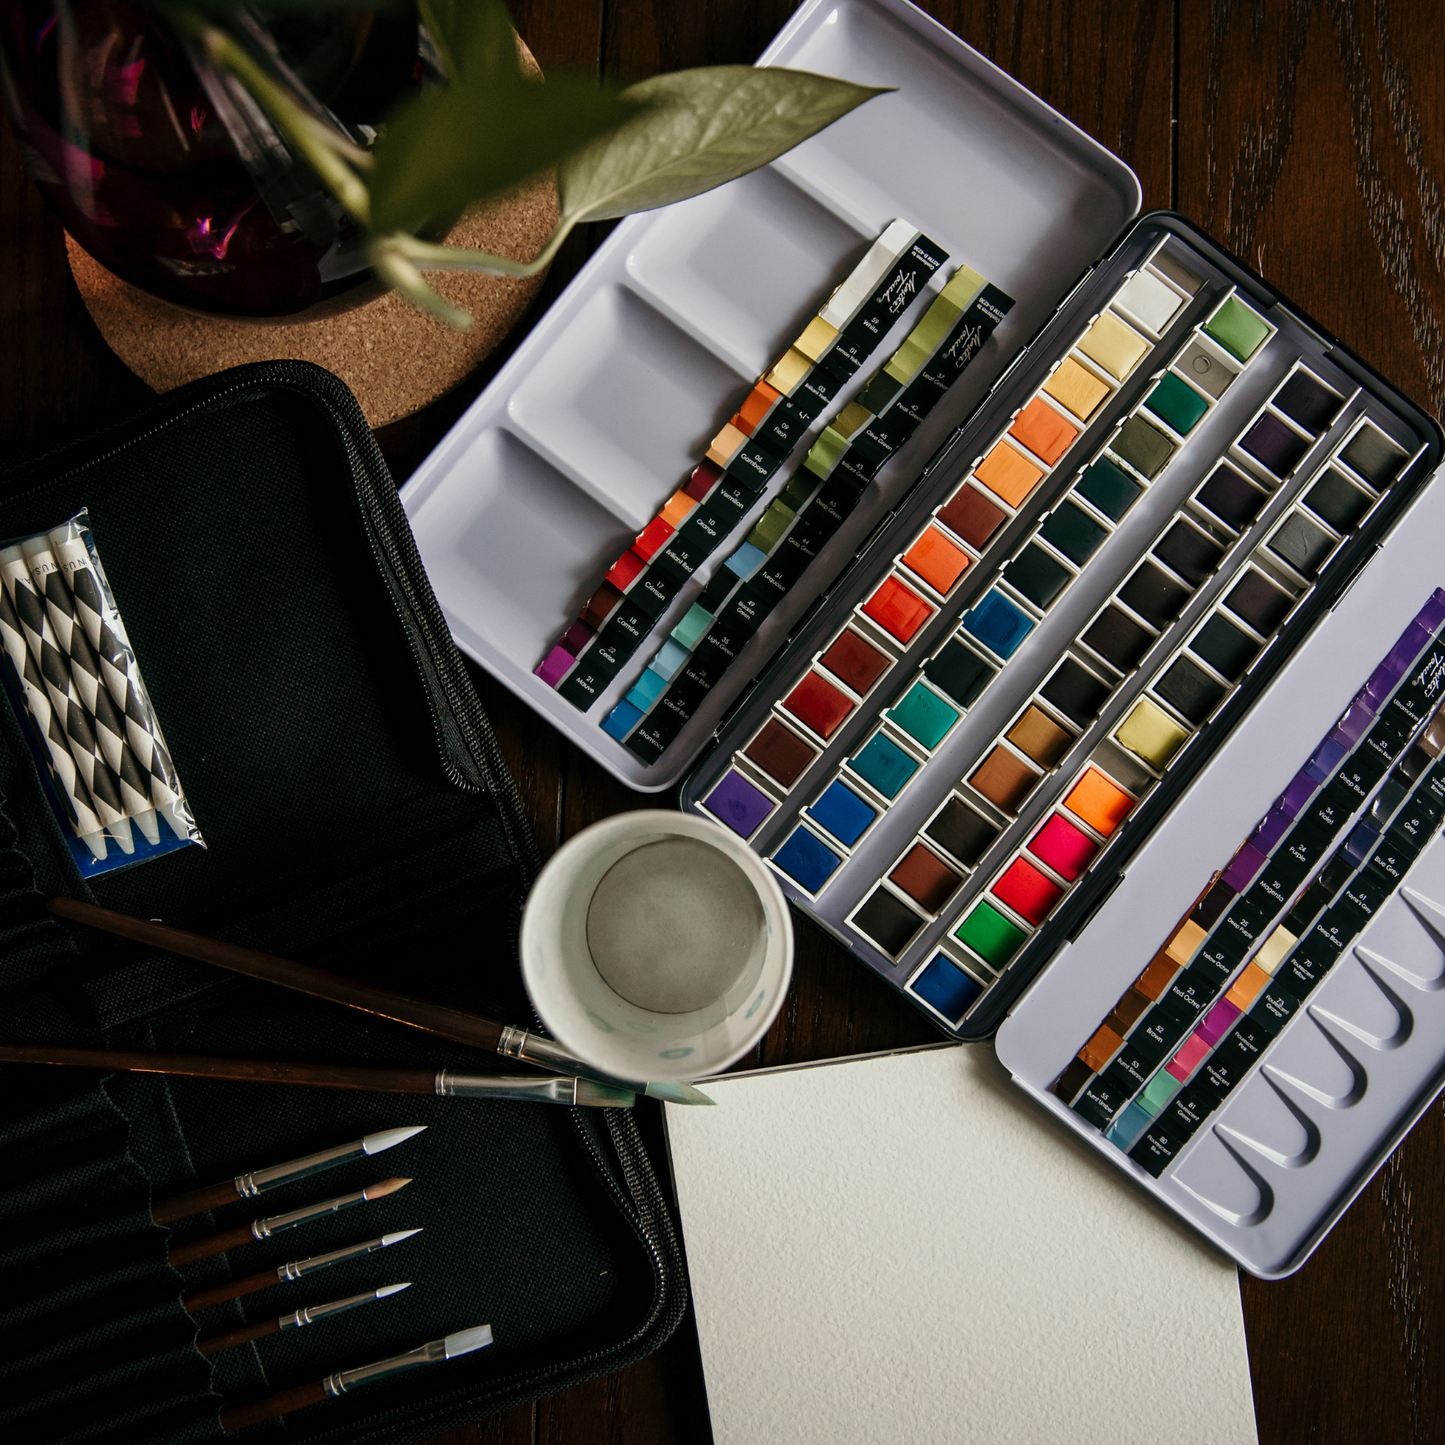 Watercolor Painting Kit - Everything You Need to Start Painting